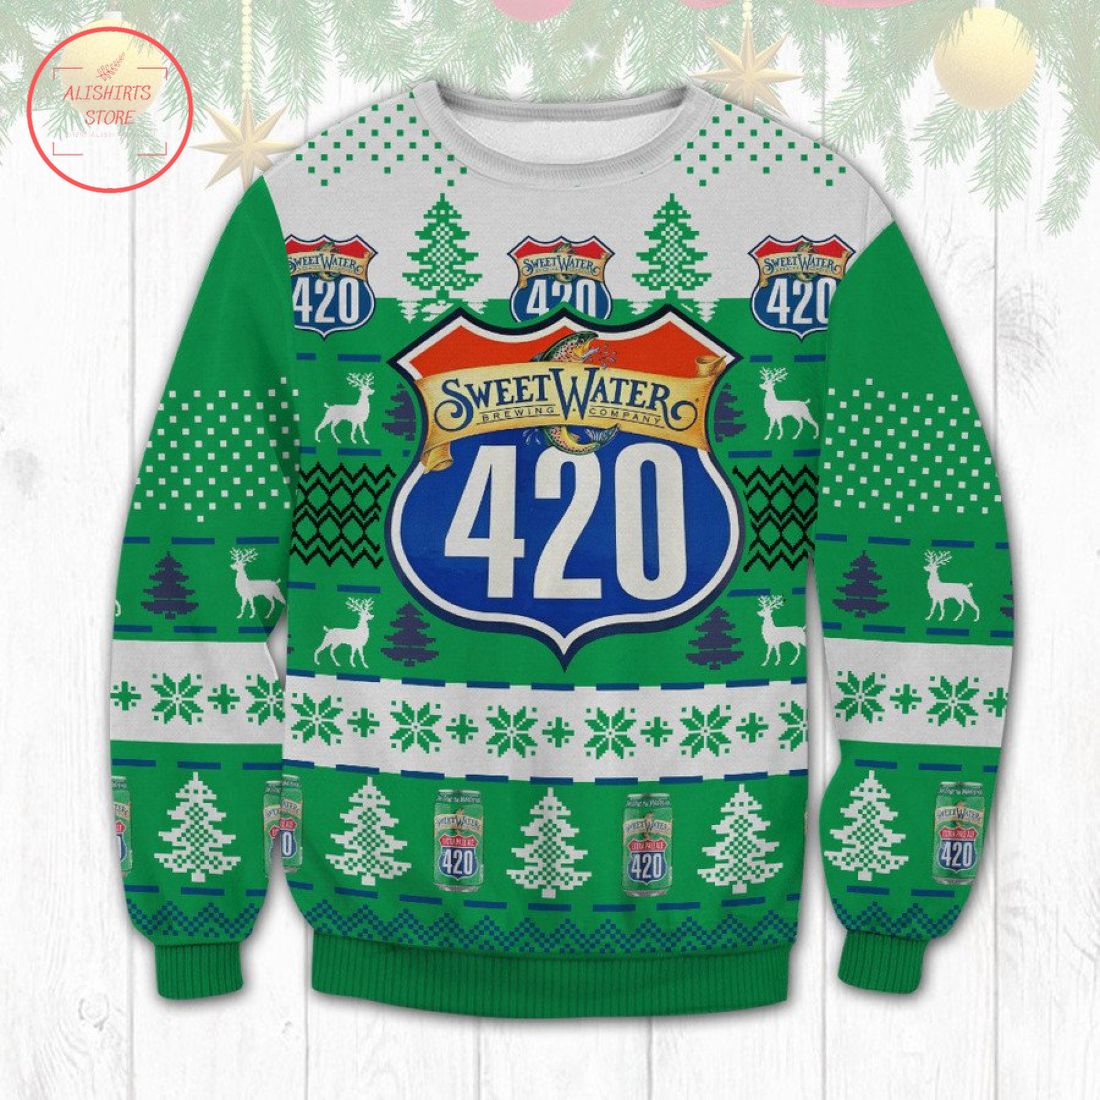 Sweetwater 420 Extra Pale Ale Ugly Christmas Sweater